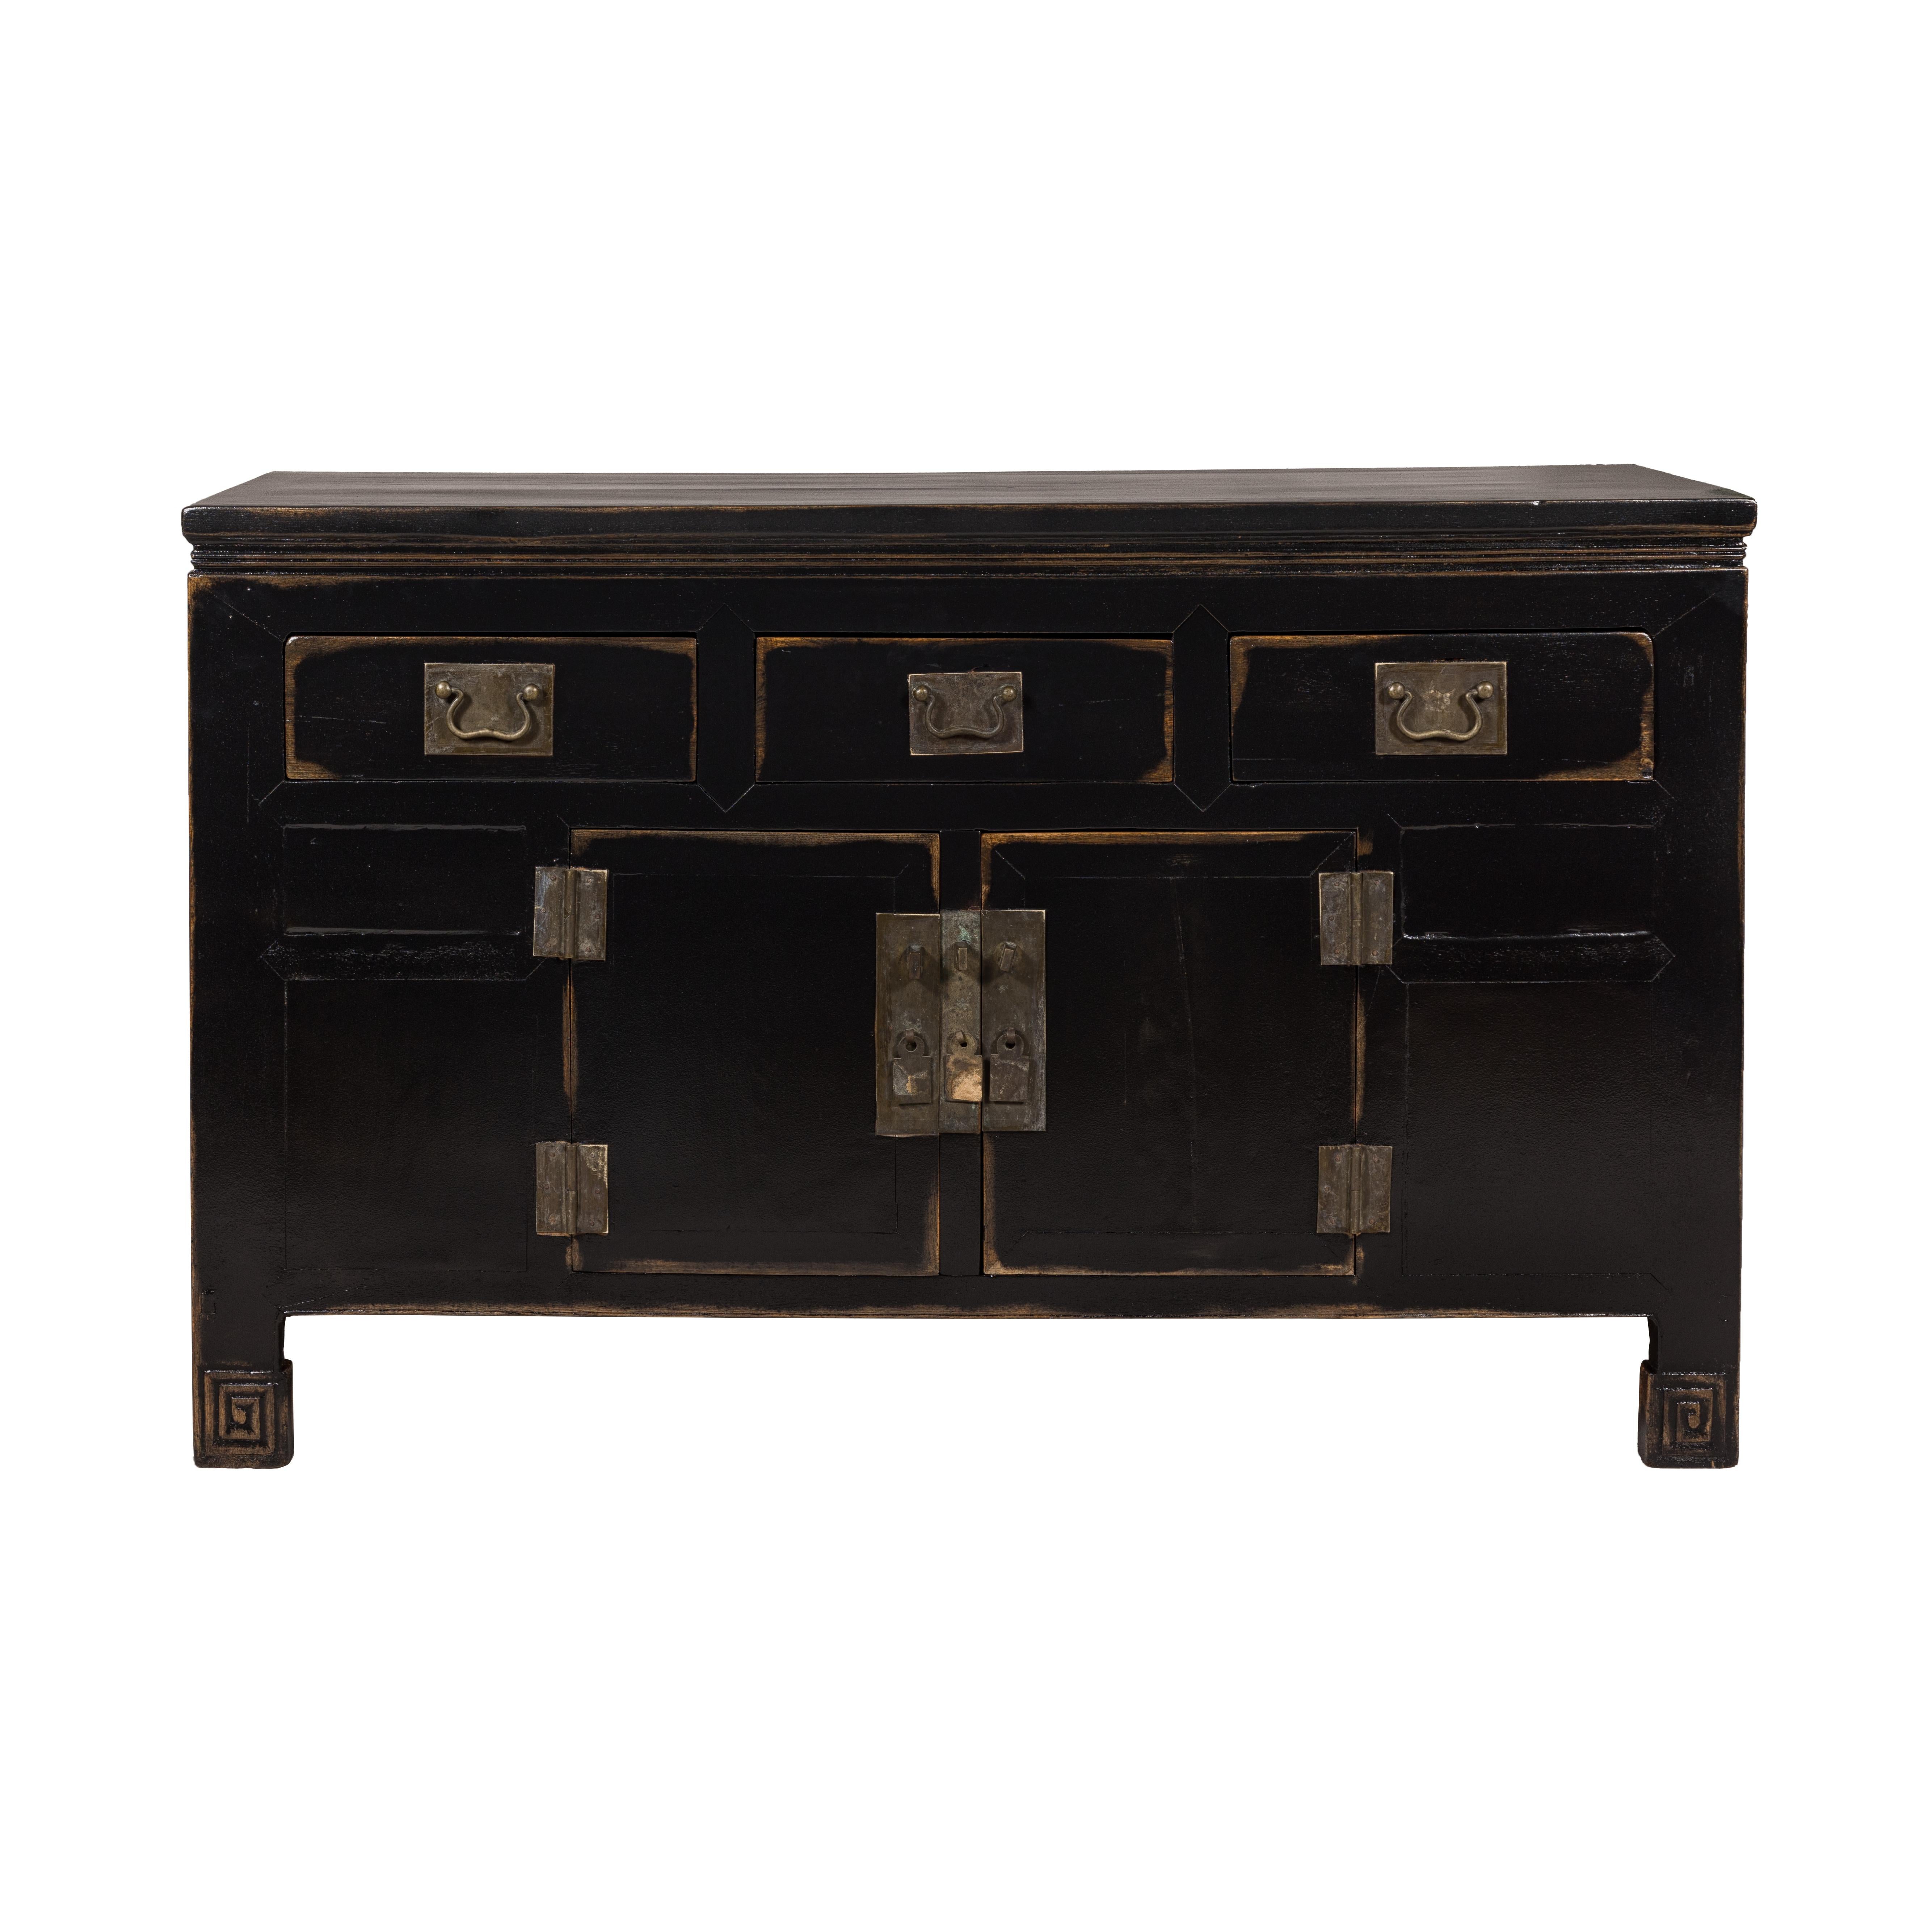 Black Lacquer Sideboard with Rubbed Edges, Brass Hardware, Doors and Drawers For Sale 12